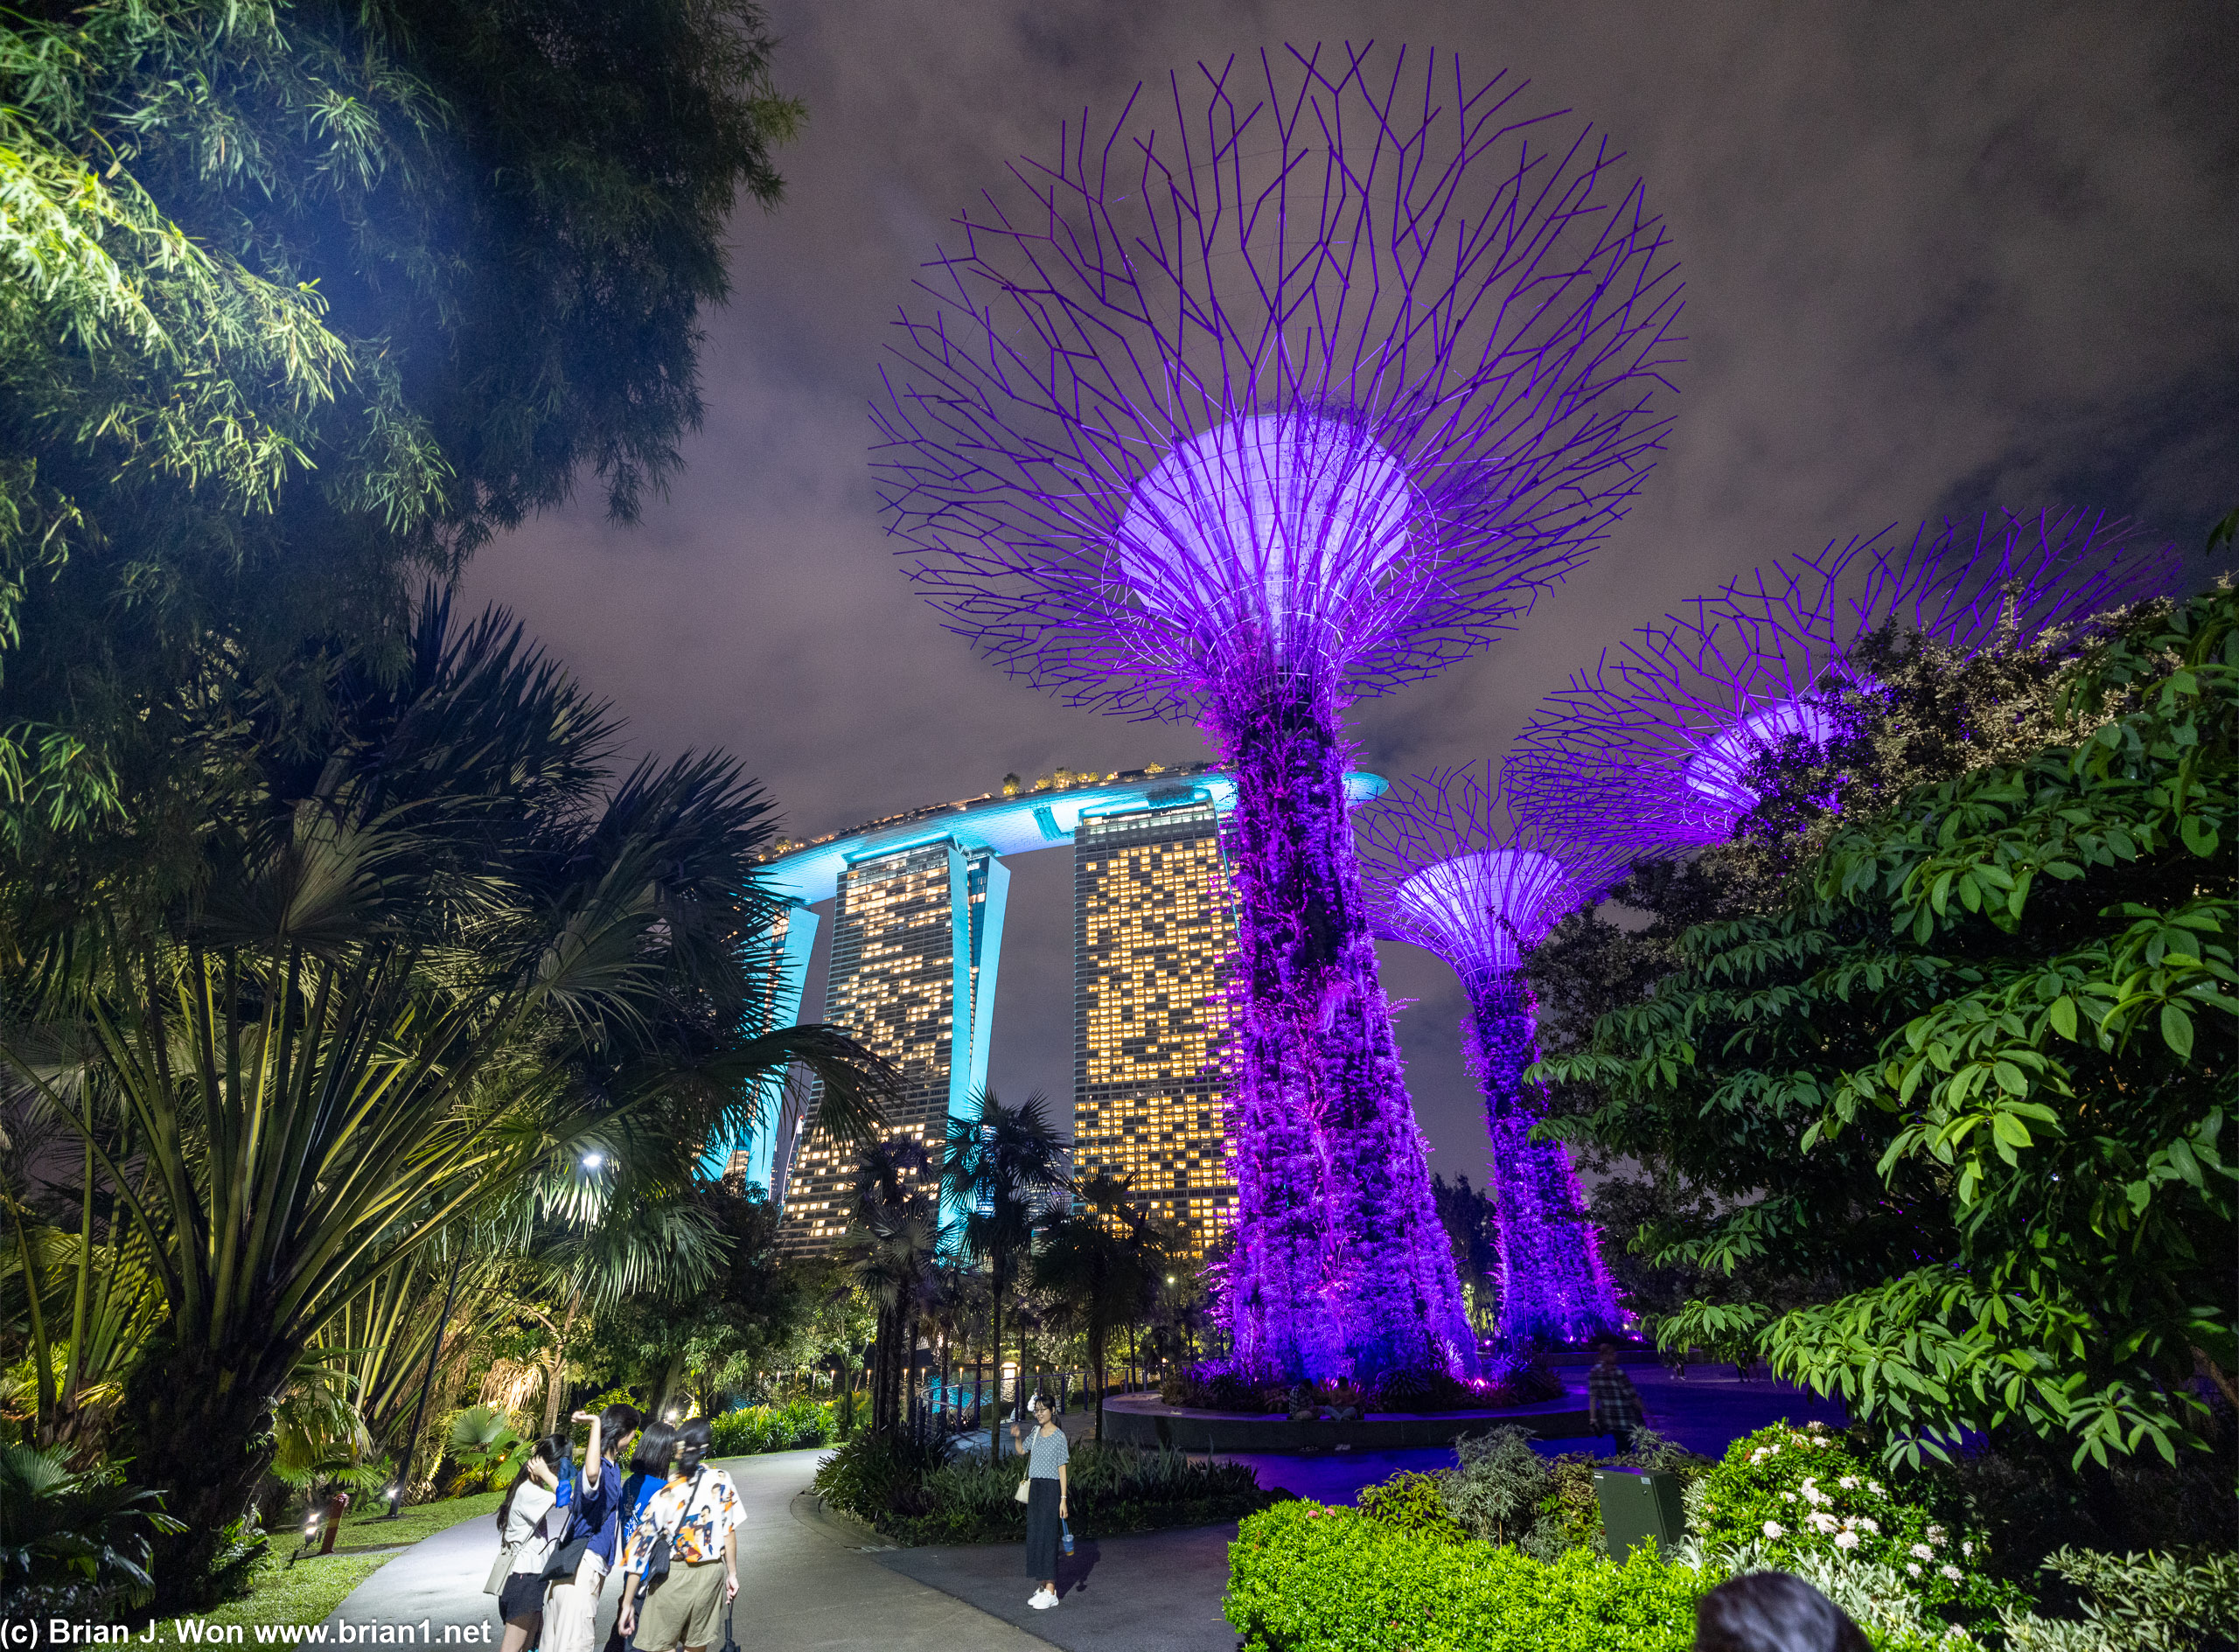 Gardens by the Bay with Marina Bay Sands in the background.